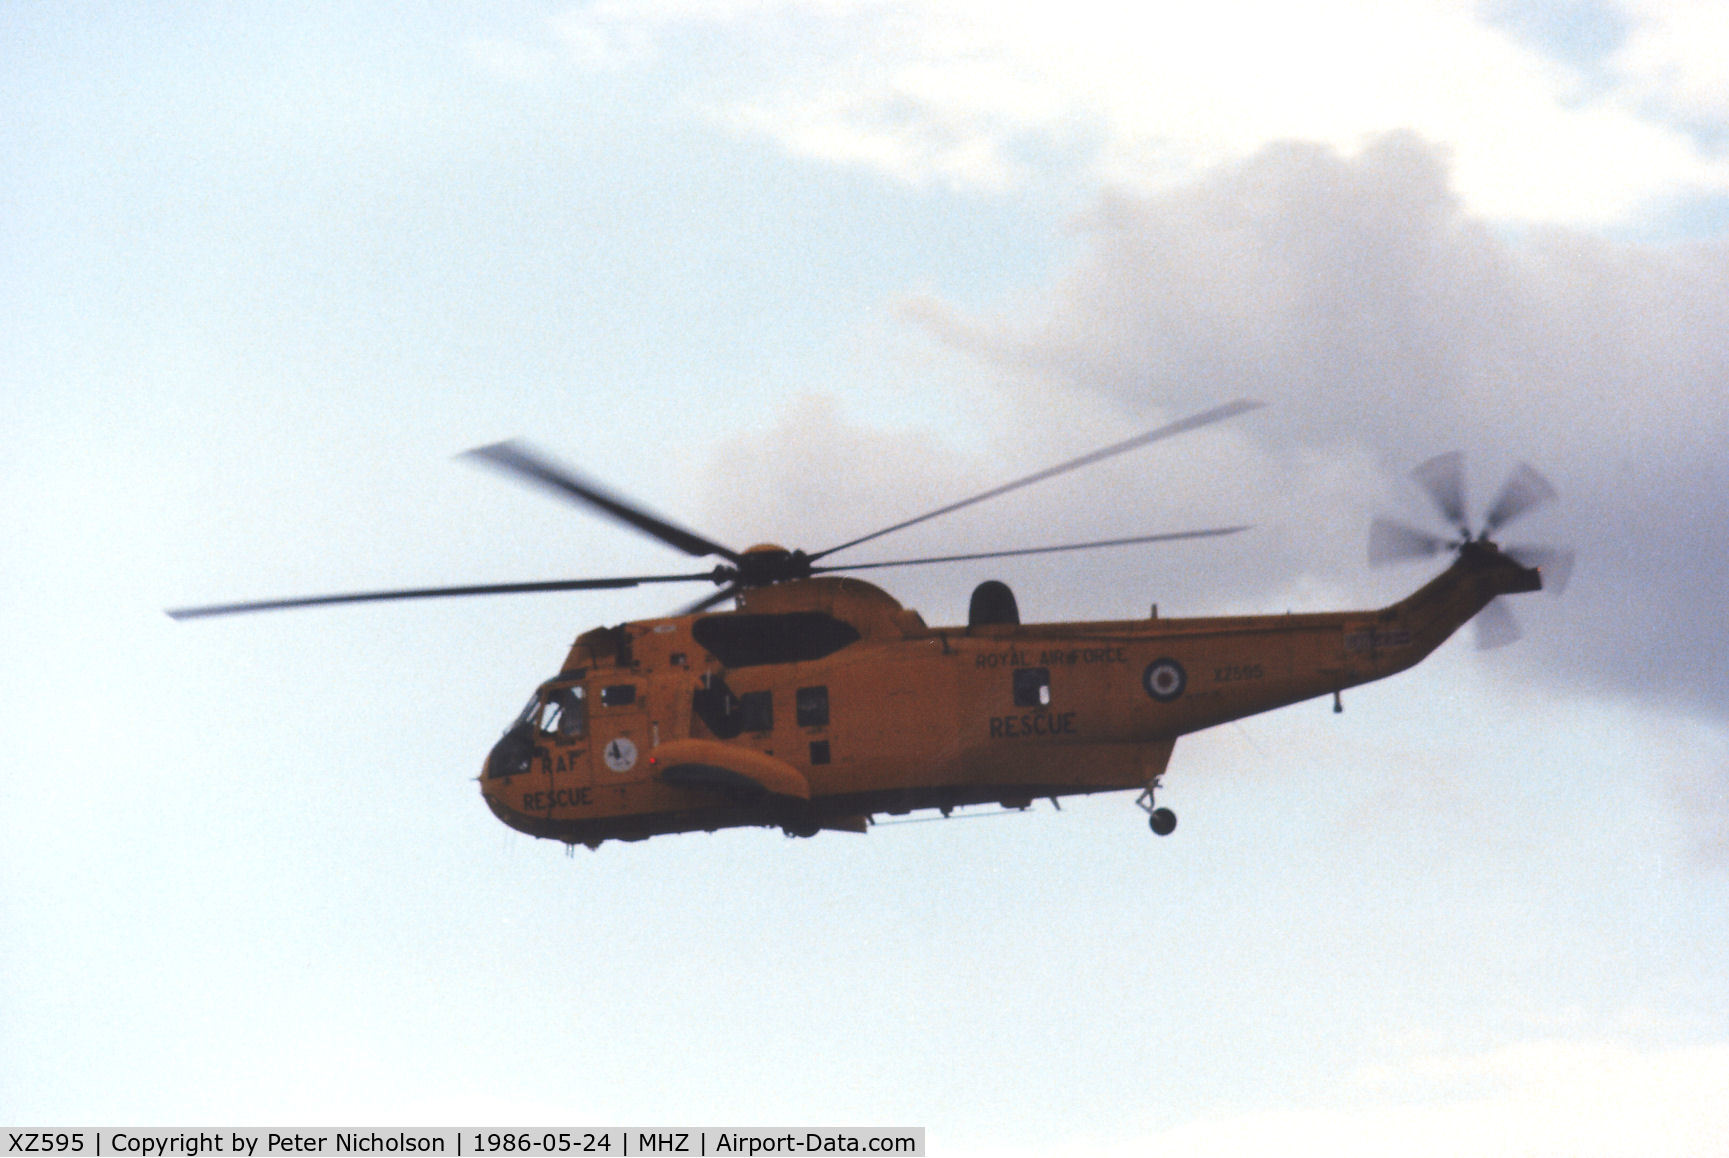 XZ595, 1978 Westland Sea King HAR.3 C/N WA861, Sea King HAR.3 of 202 Squadron in action at the 1986 RAF Mildenhall Air Fete.